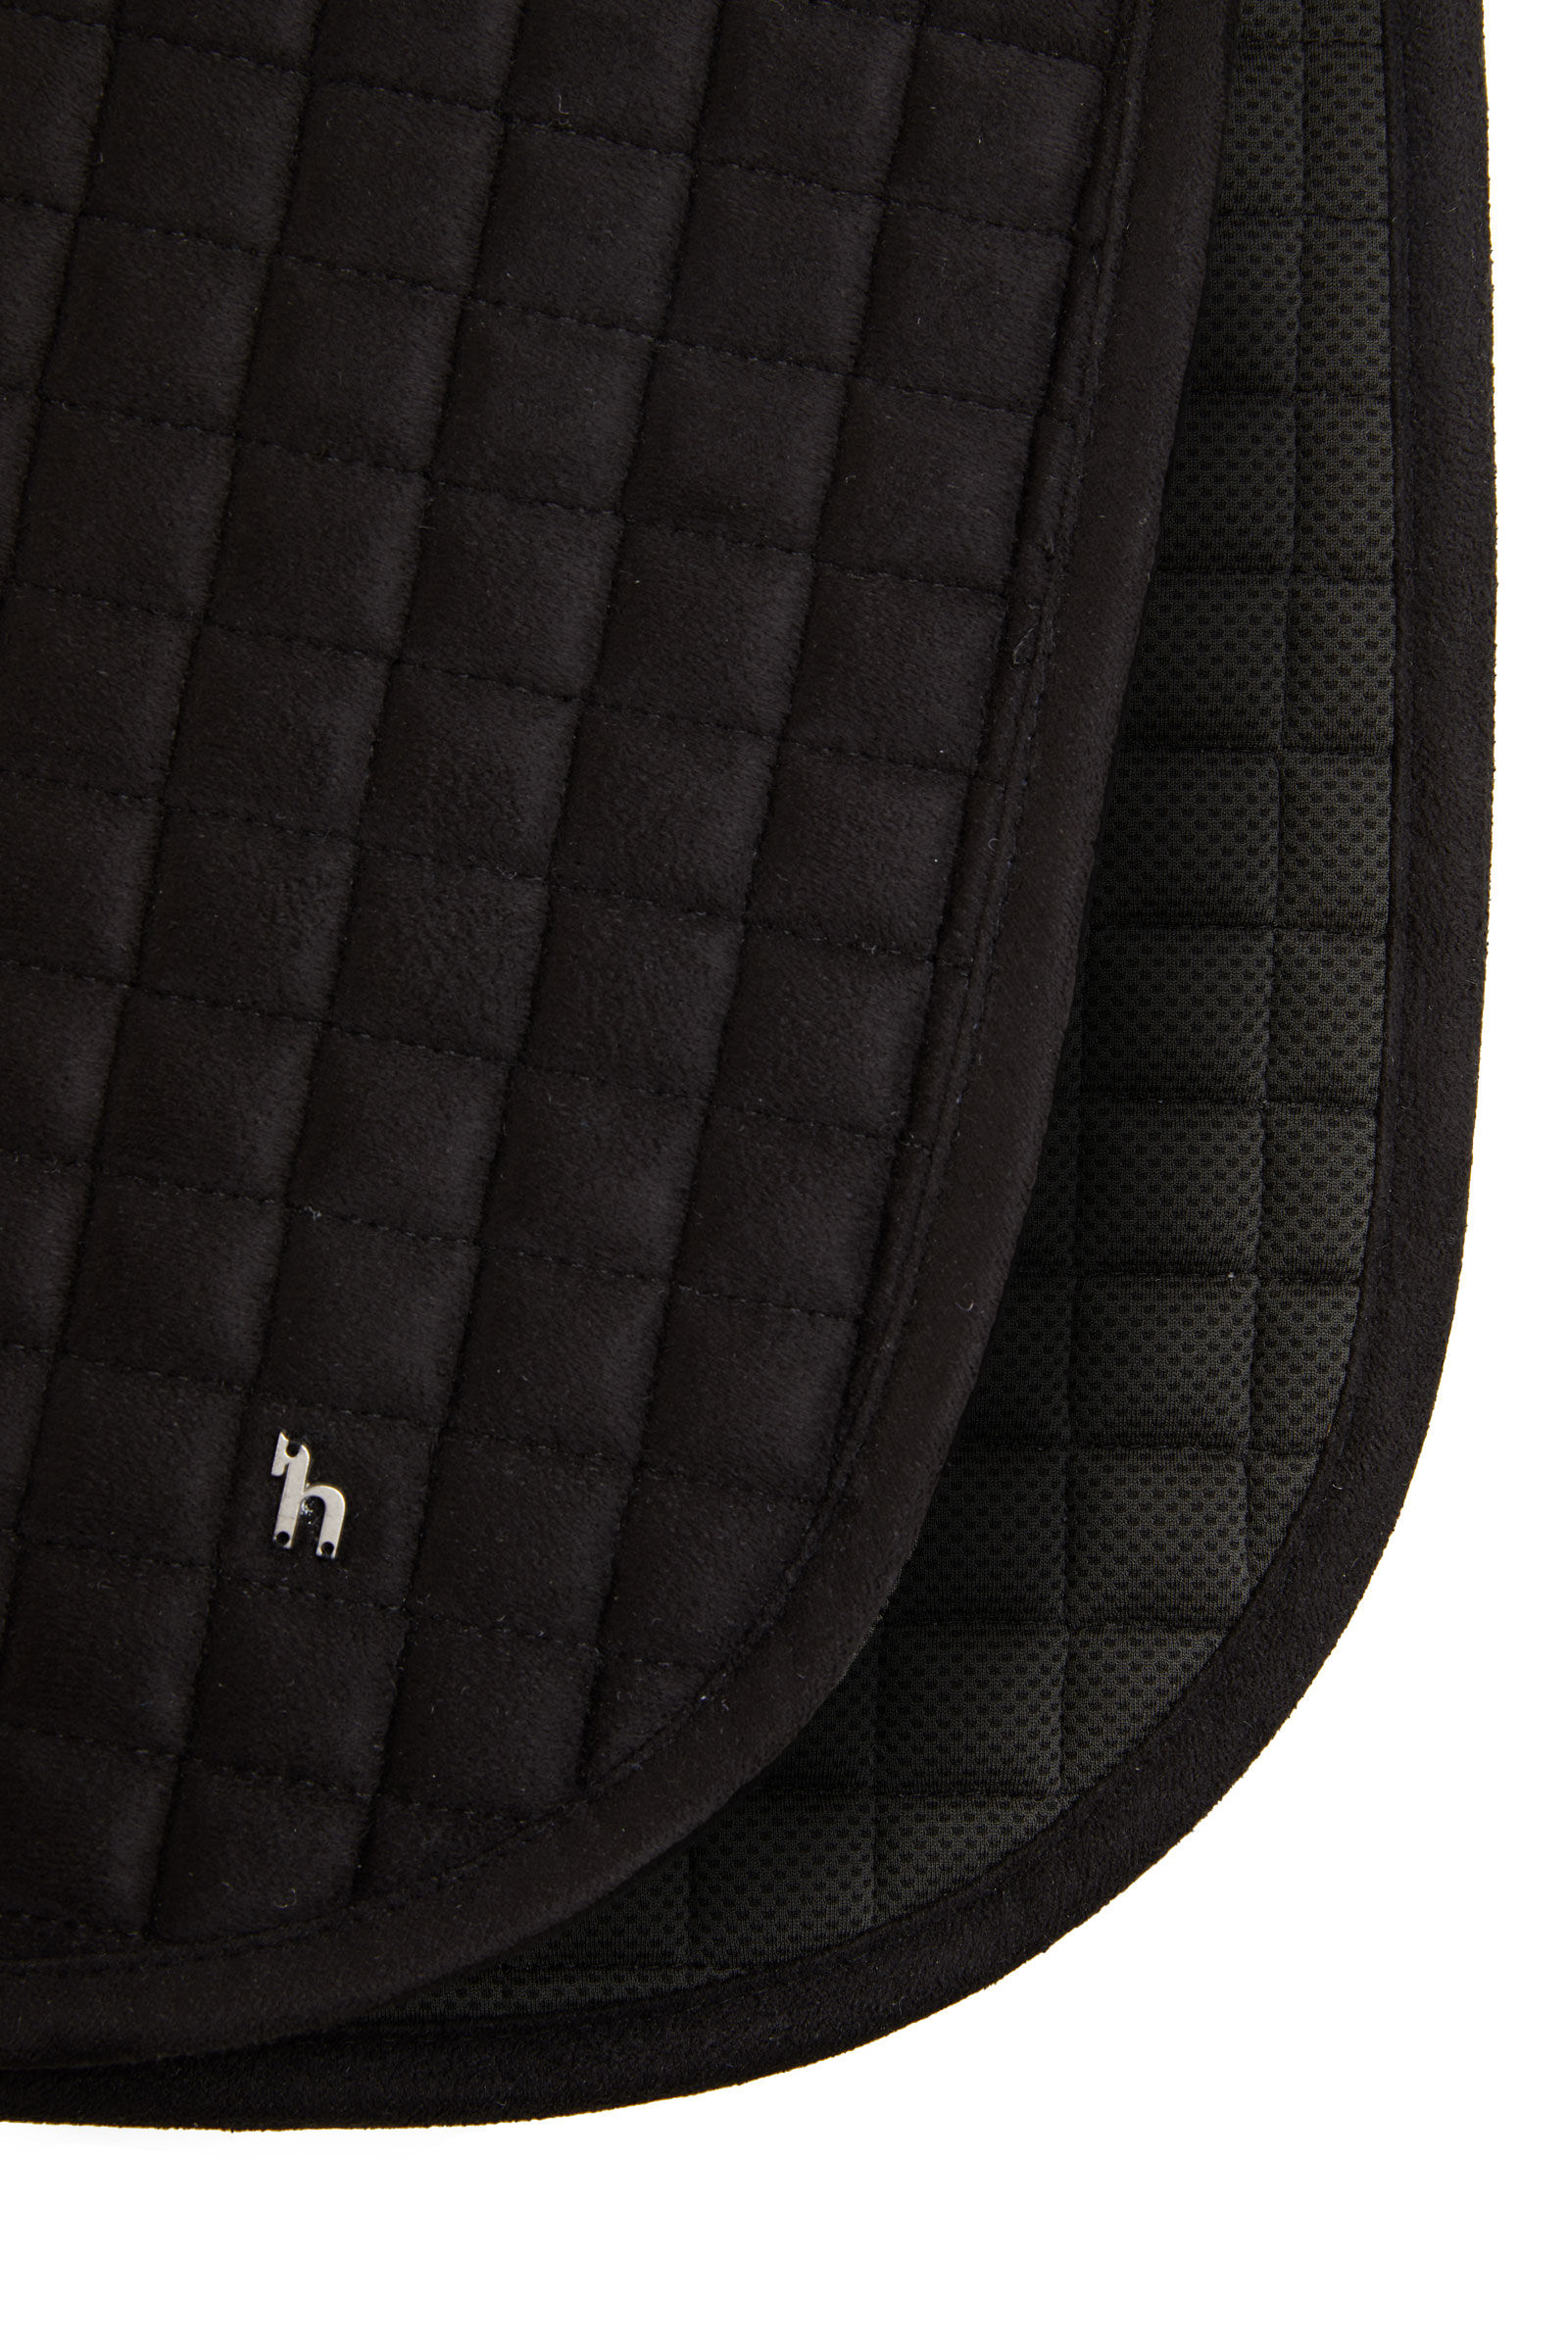 Horze Cooling All Purpose Saddle Pad